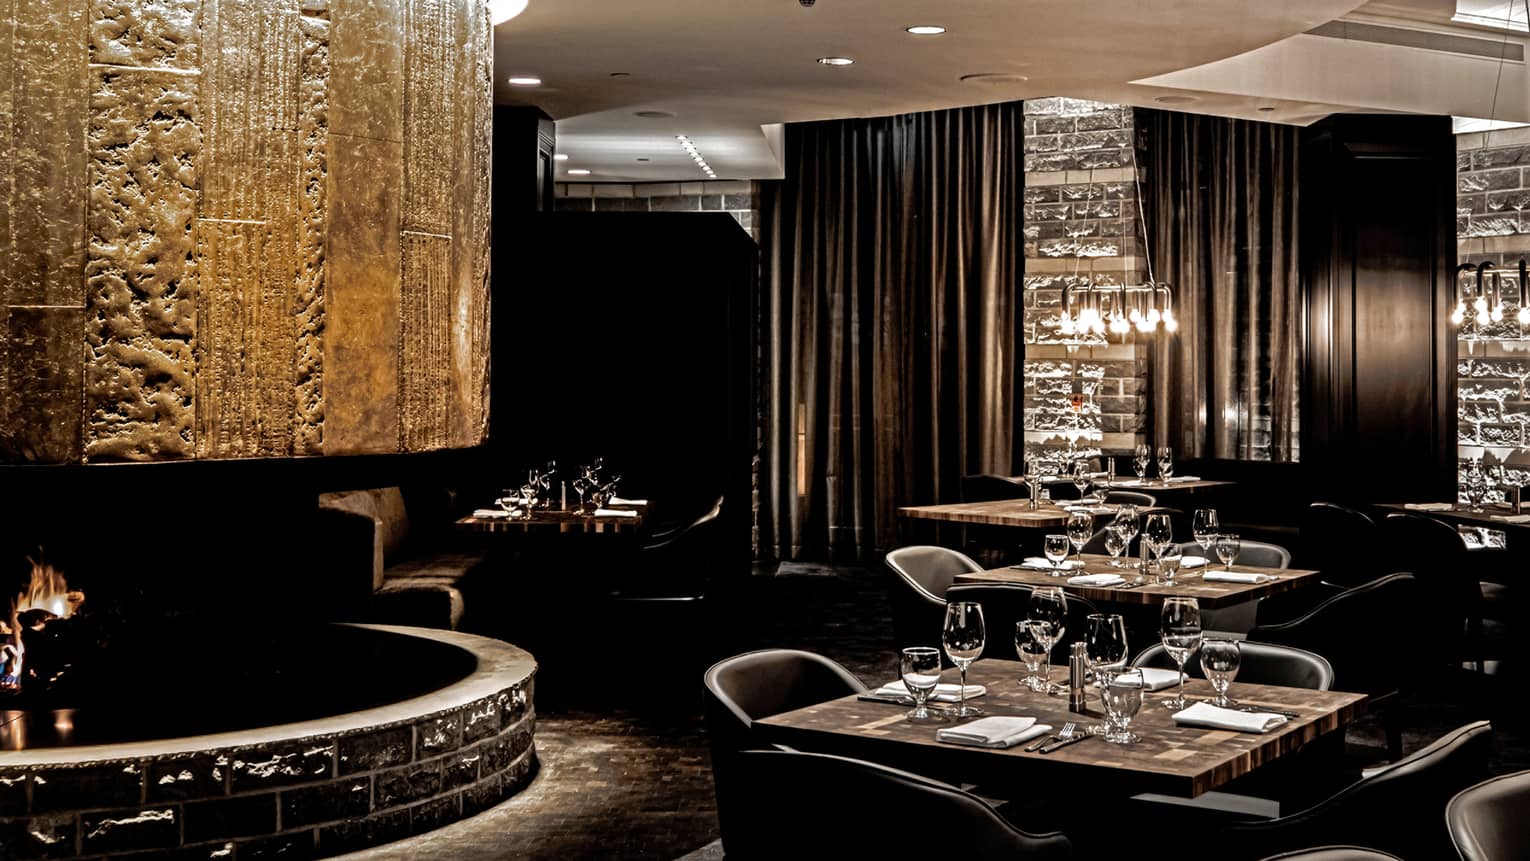 Newly renovated steakhouse with dark wood tables set for four, black curtains, lowlights, fireplace 